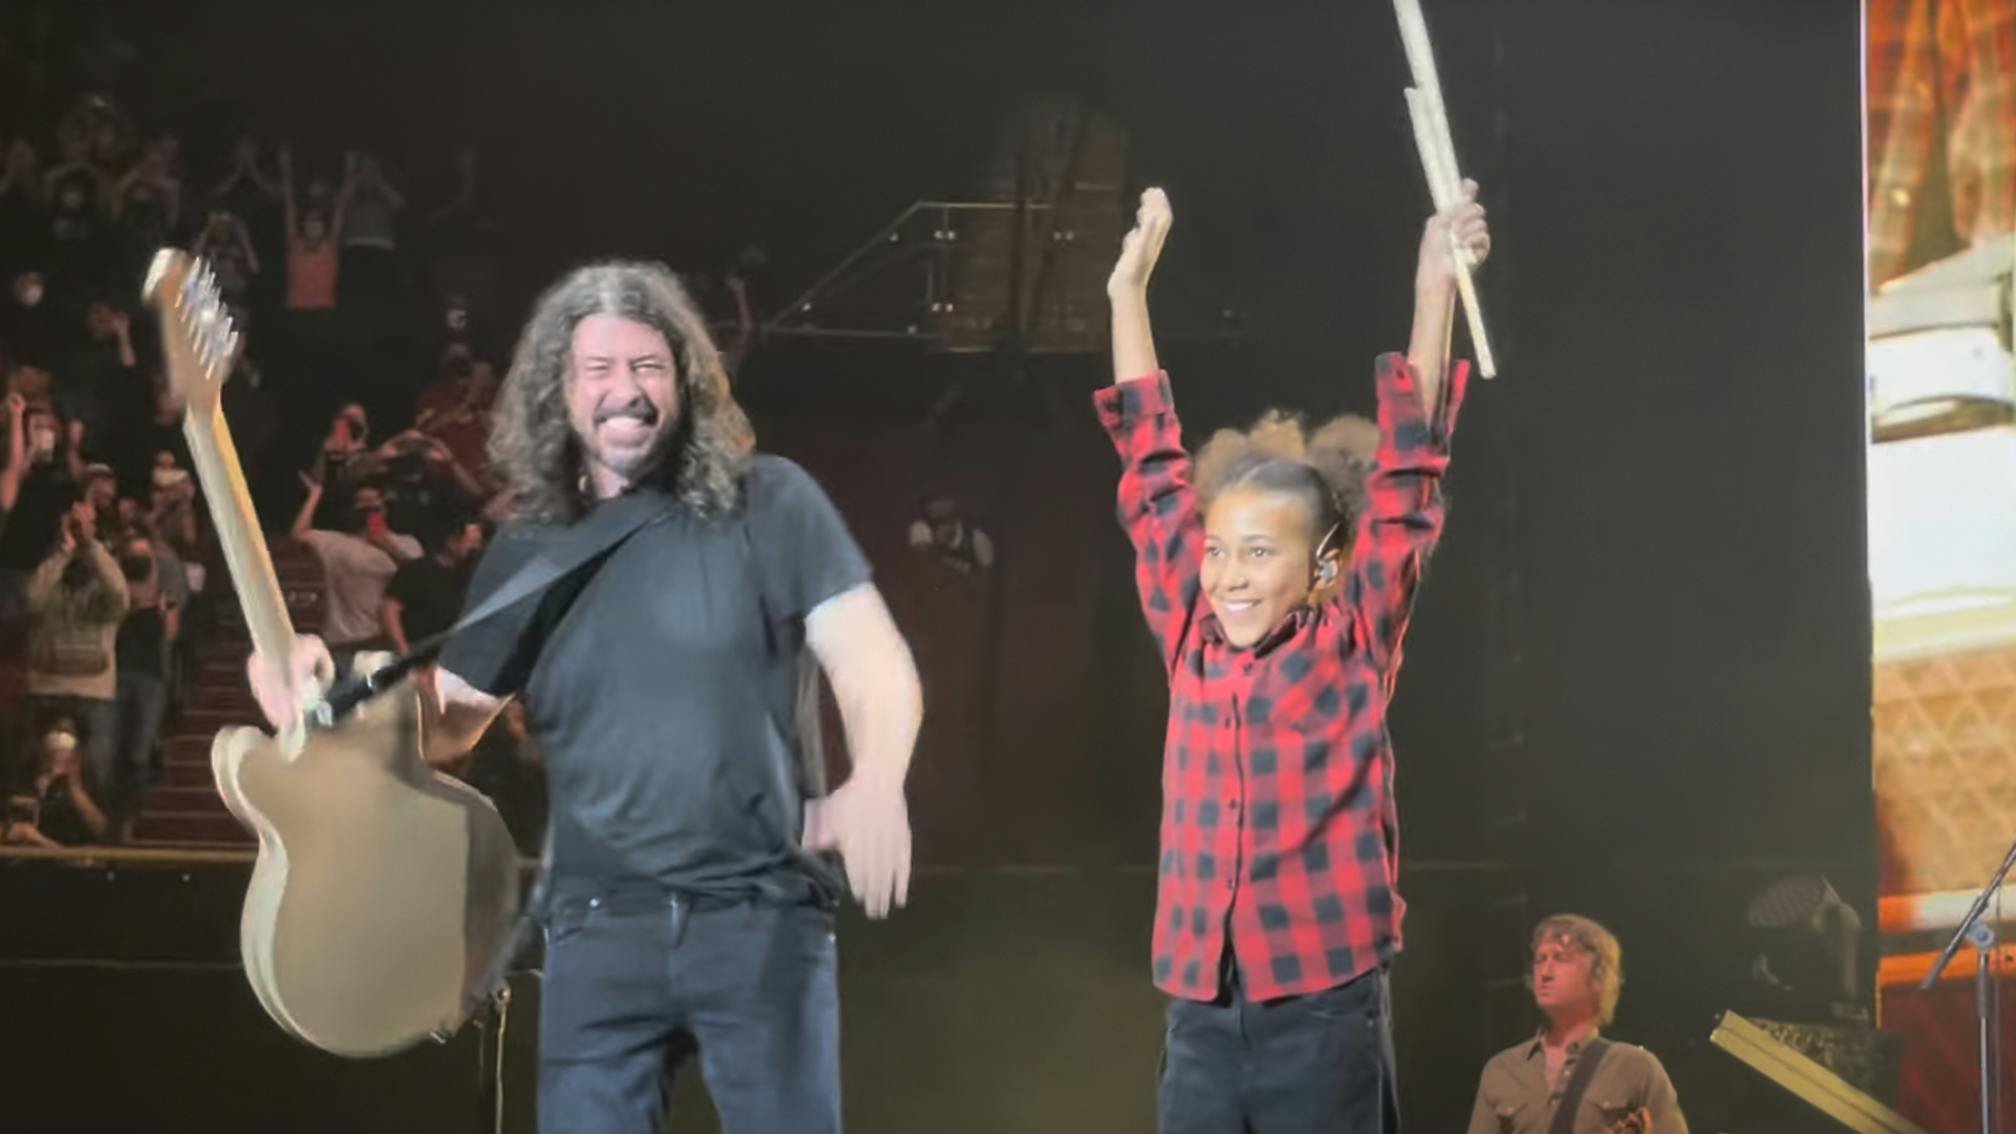 Nandi Bushell says drumming with Foo Fighters was "the best night of my entire life"